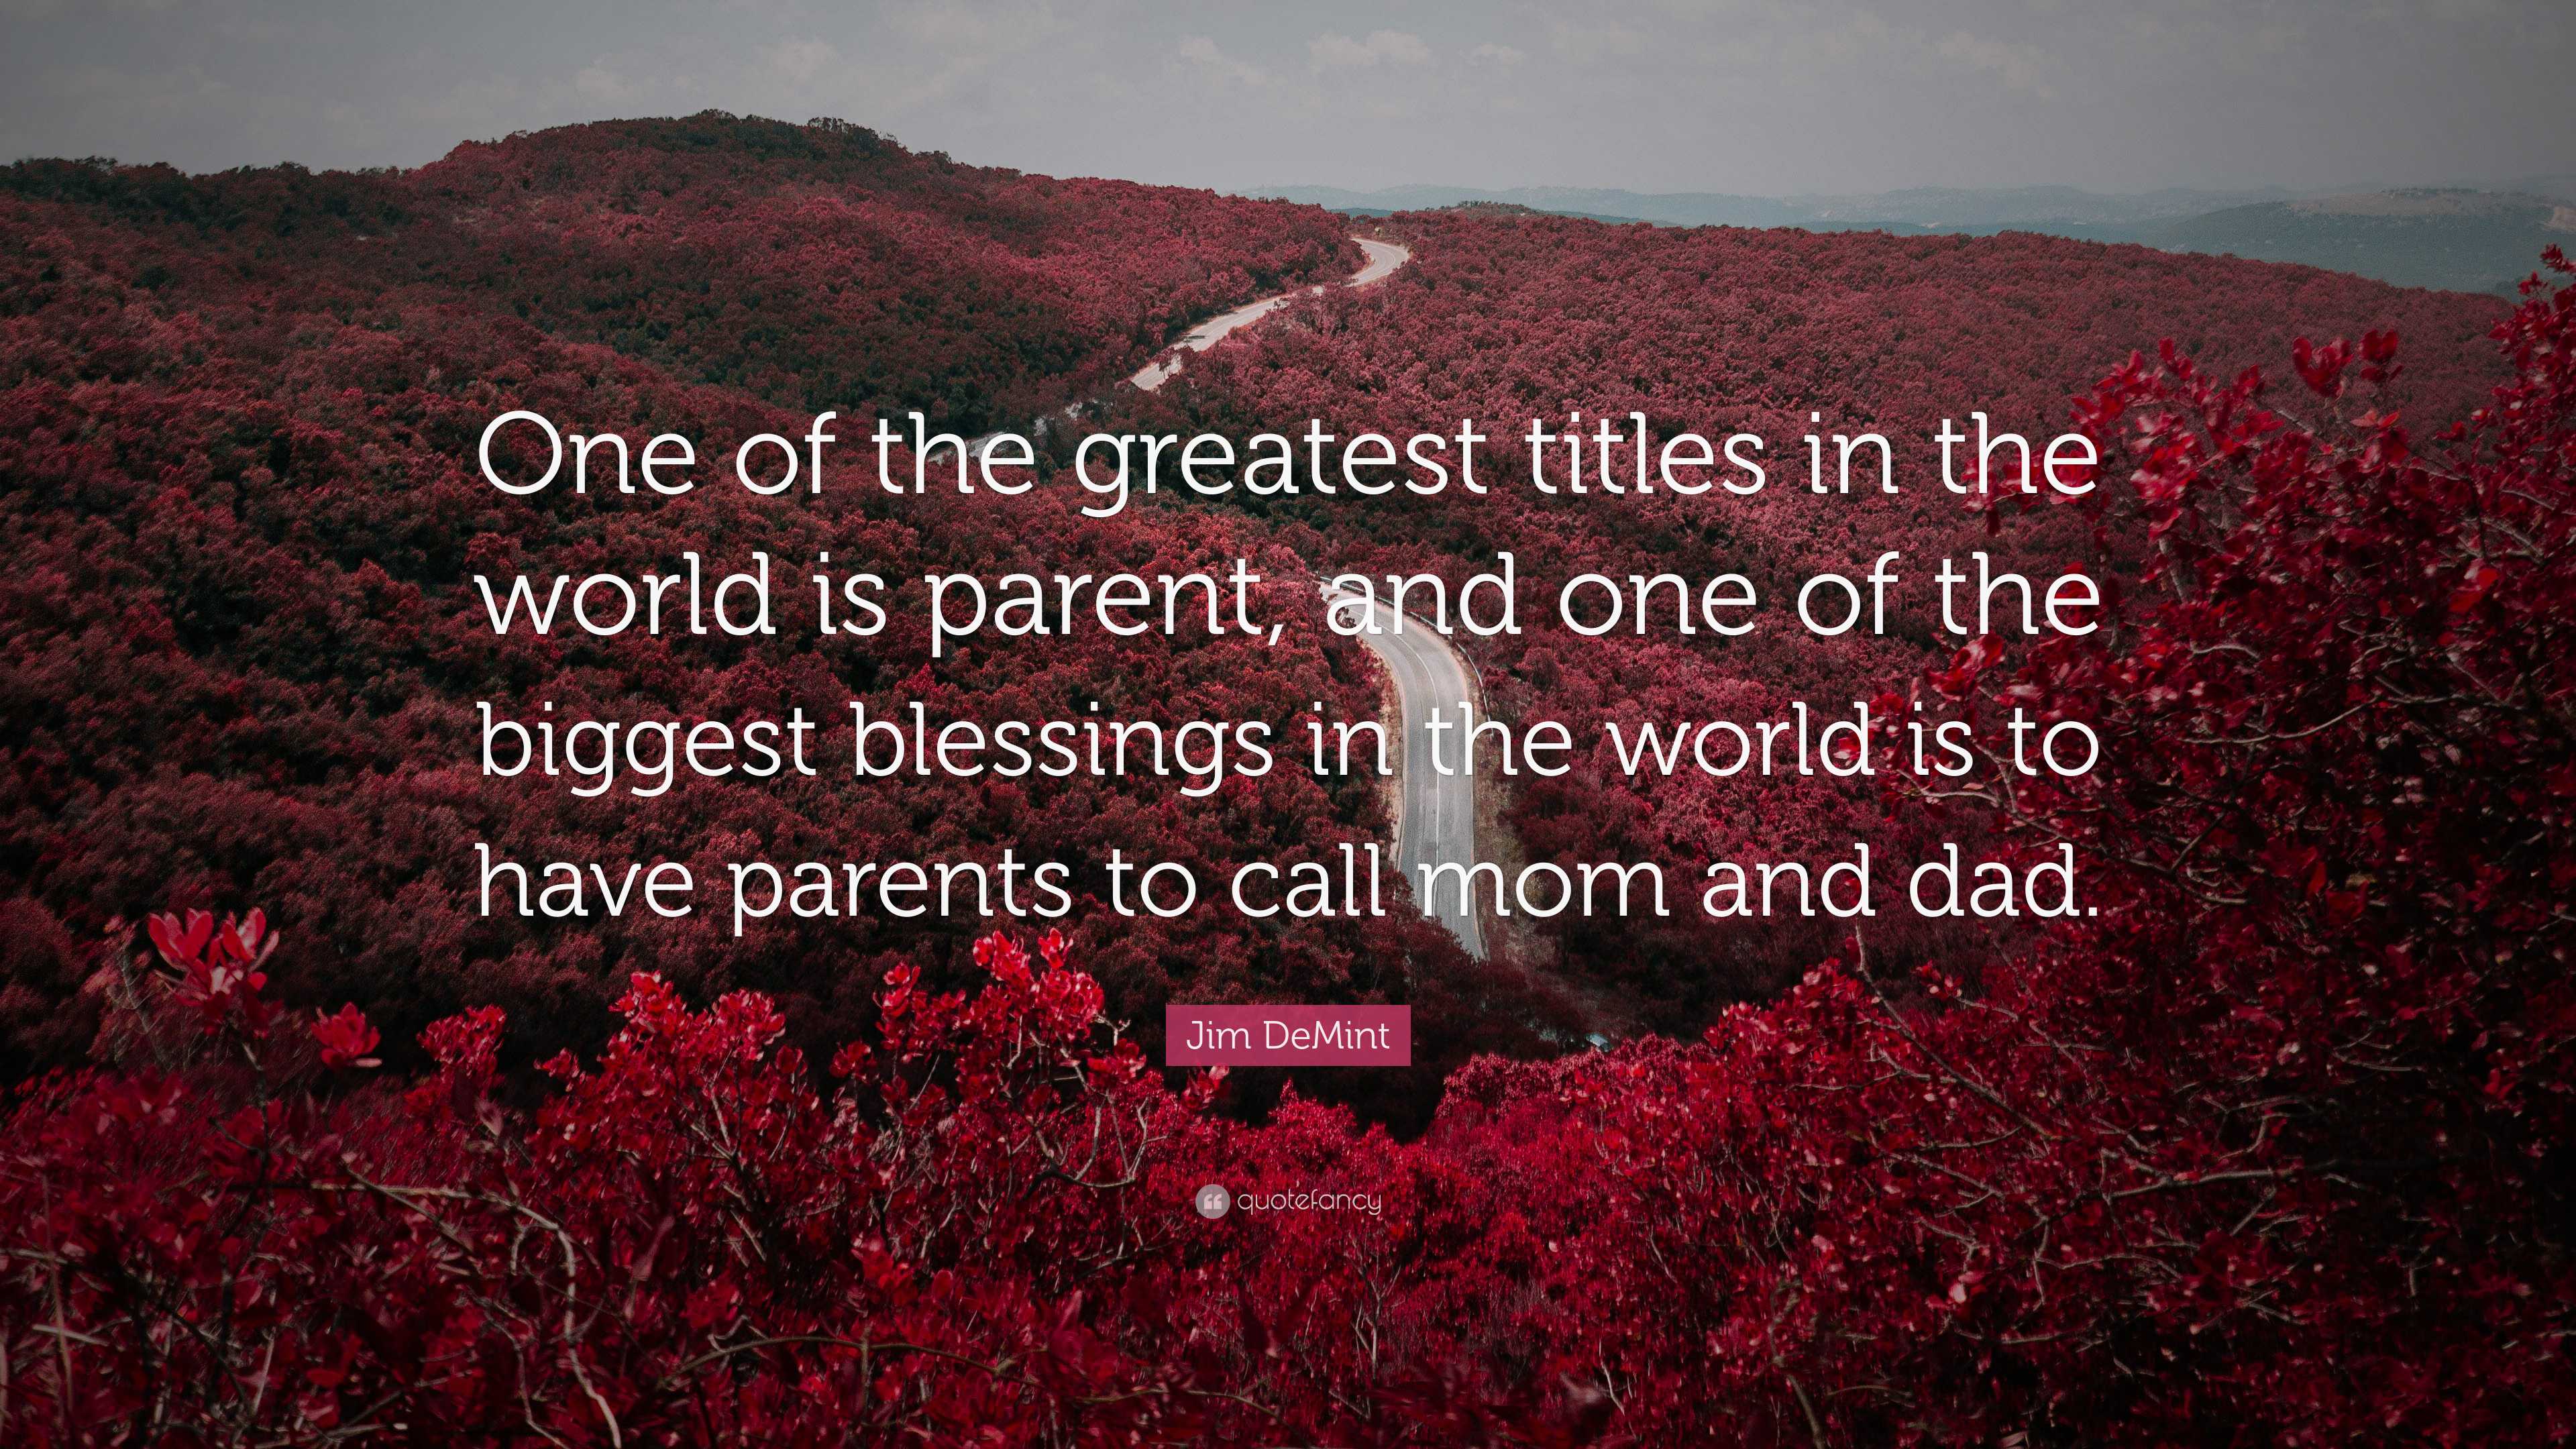 Jim DeMint Quote: “One of the greatest titles in the world is parent, and  one of the biggest blessings in the world is to have parents to c”